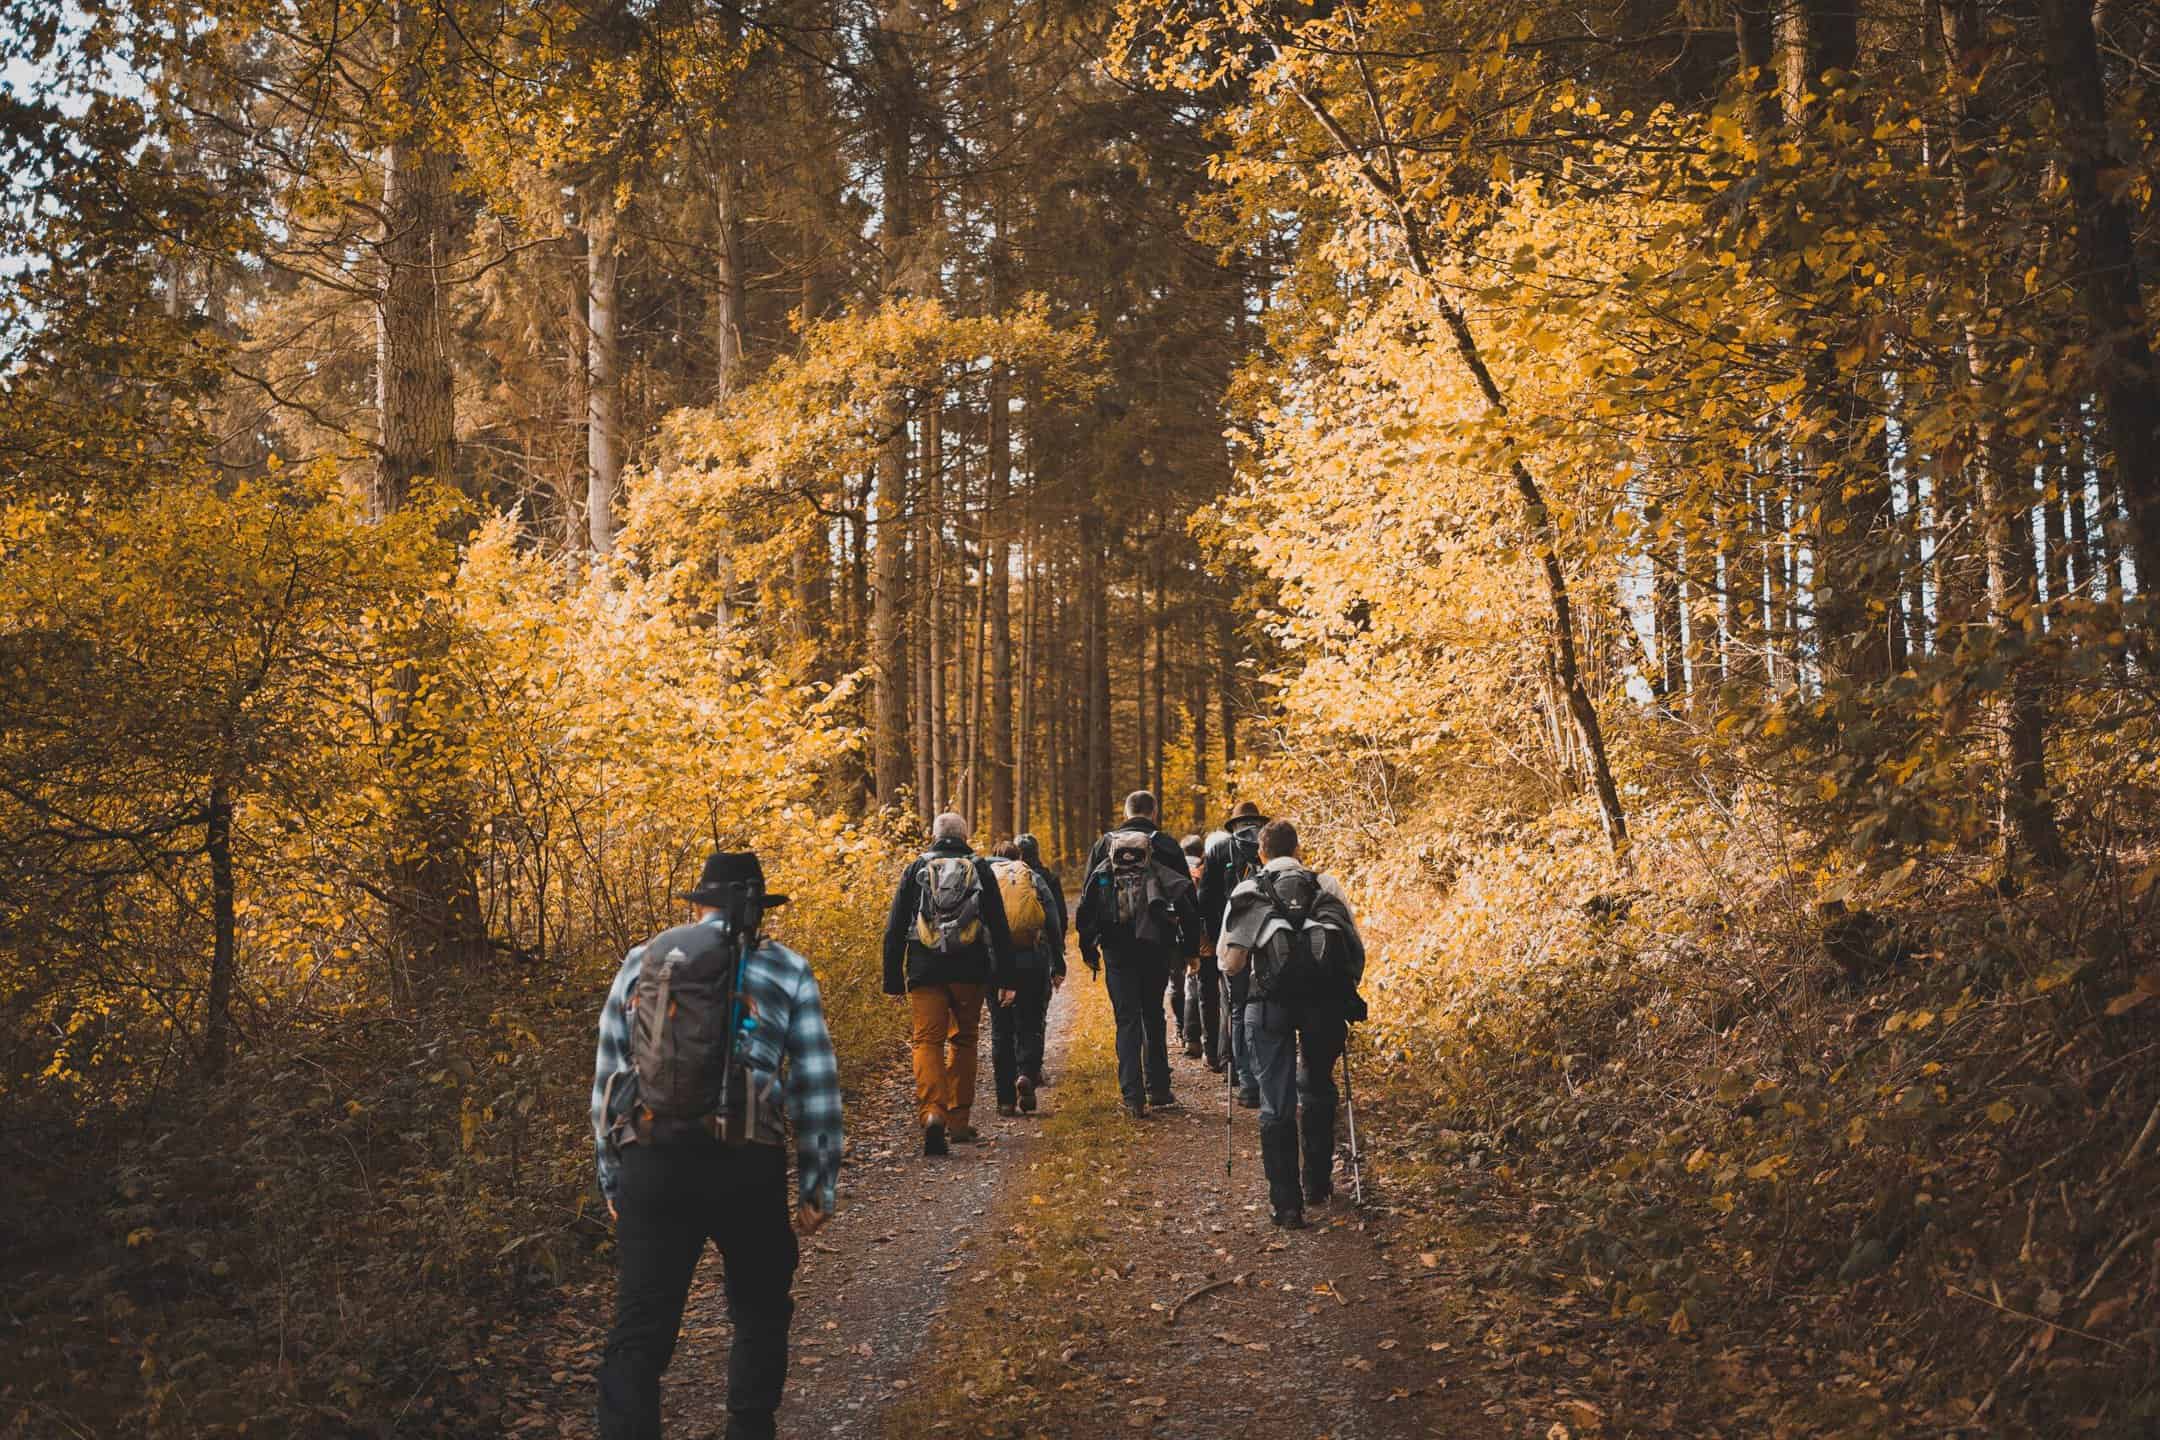 A group of walkers follow a path through a forest in autumn